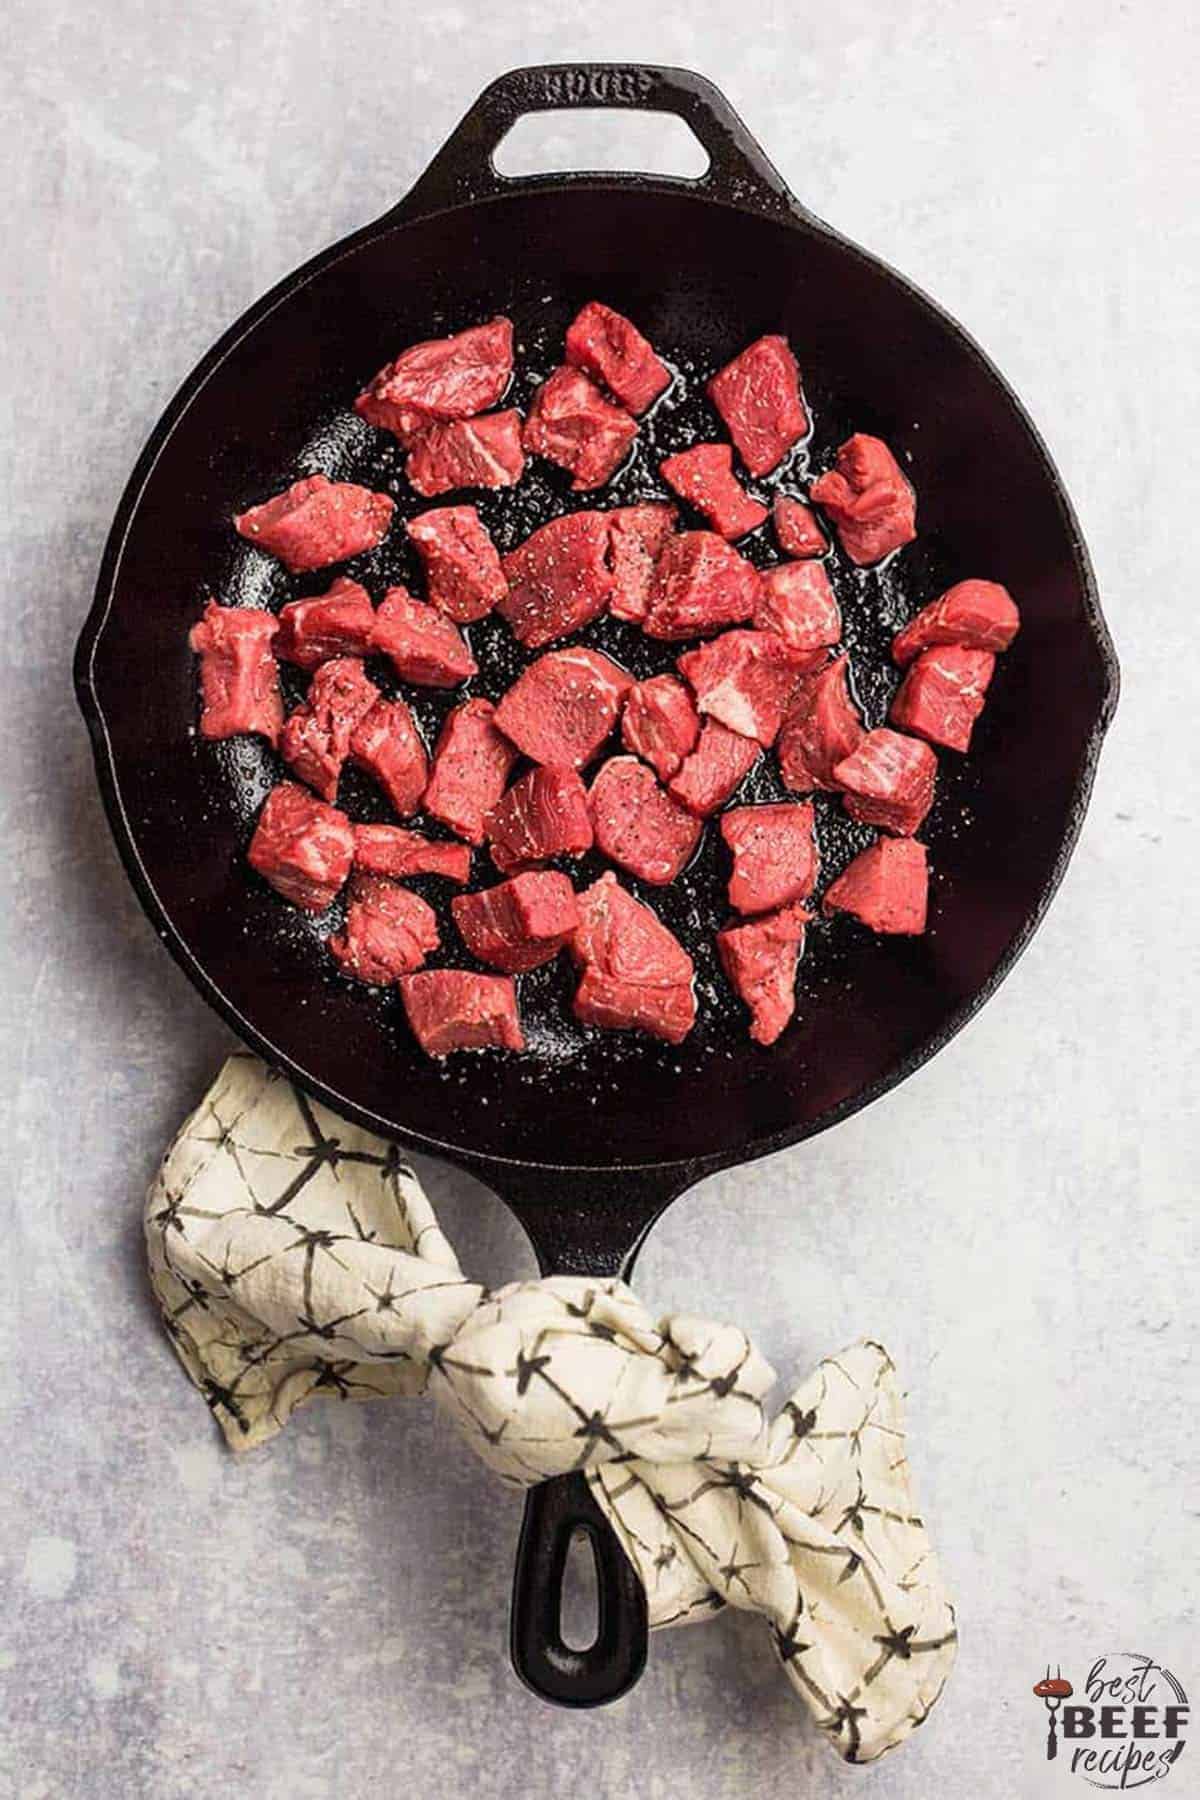 Cooking steak bites in a skillet - they are still red